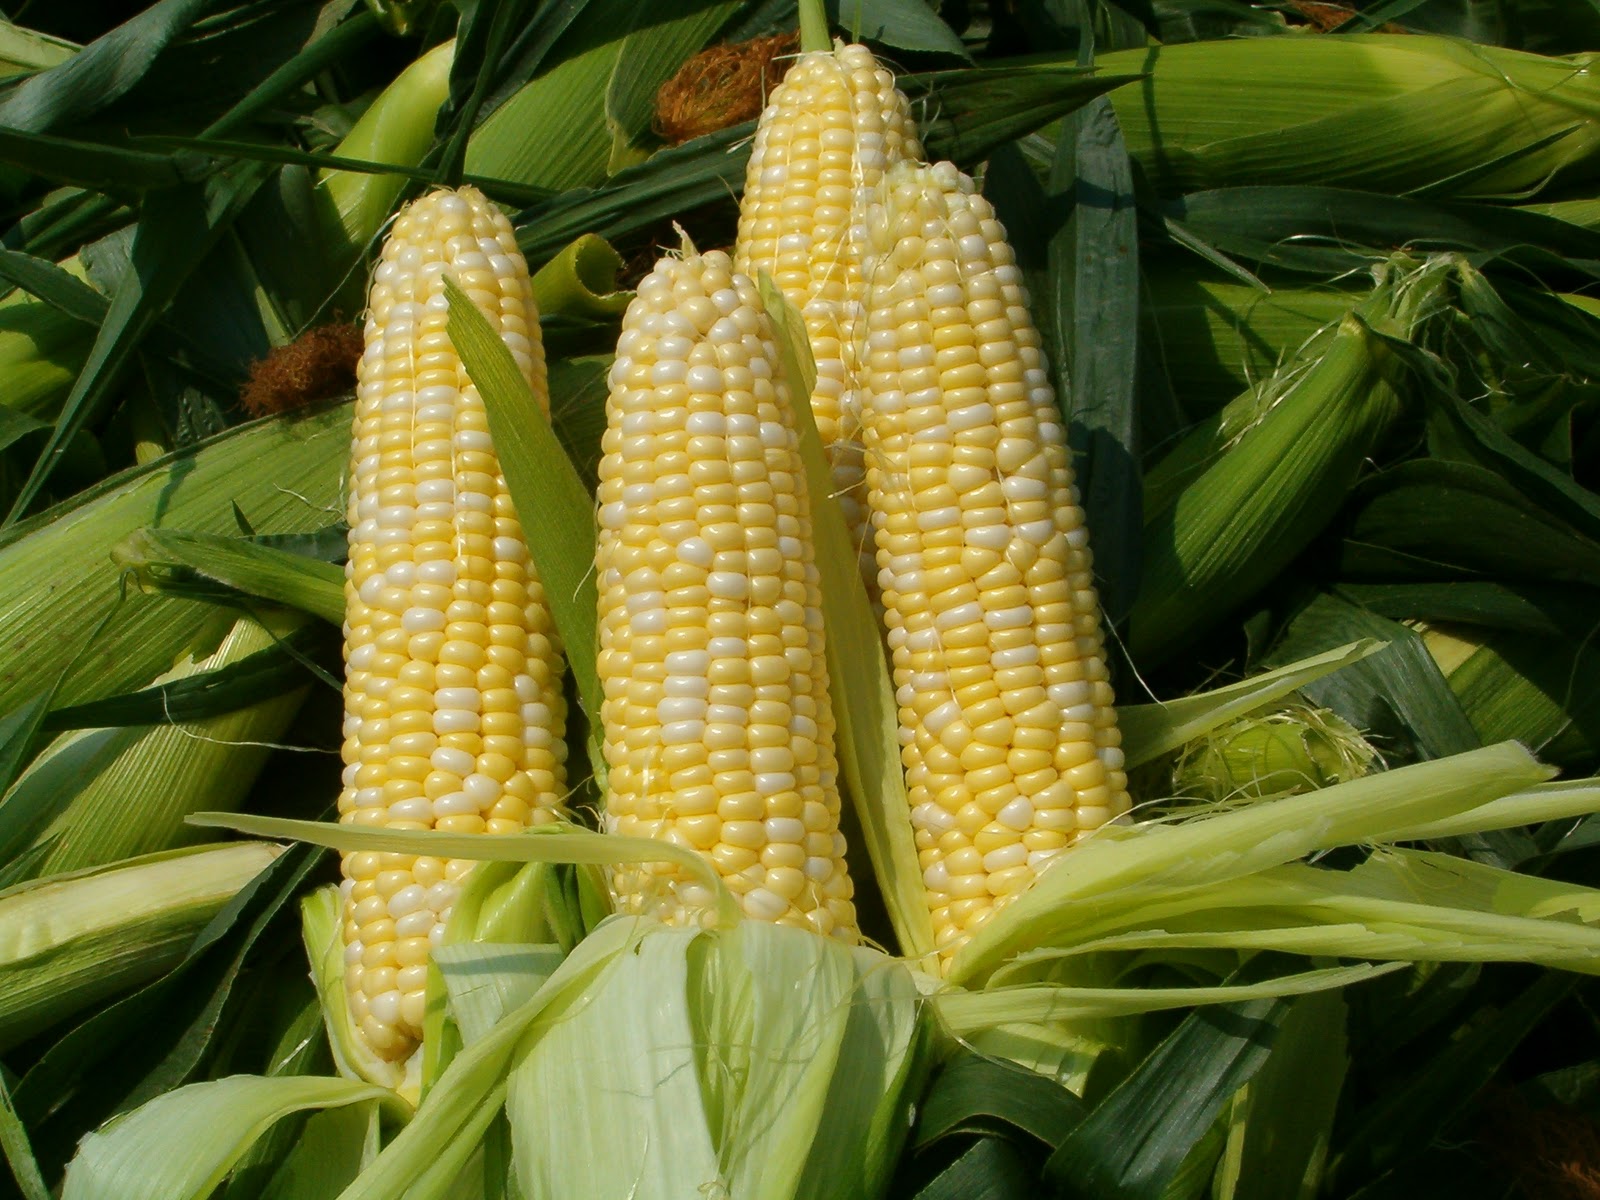 Corn Stock Photos, Images, & Pictures - 253,339 Images